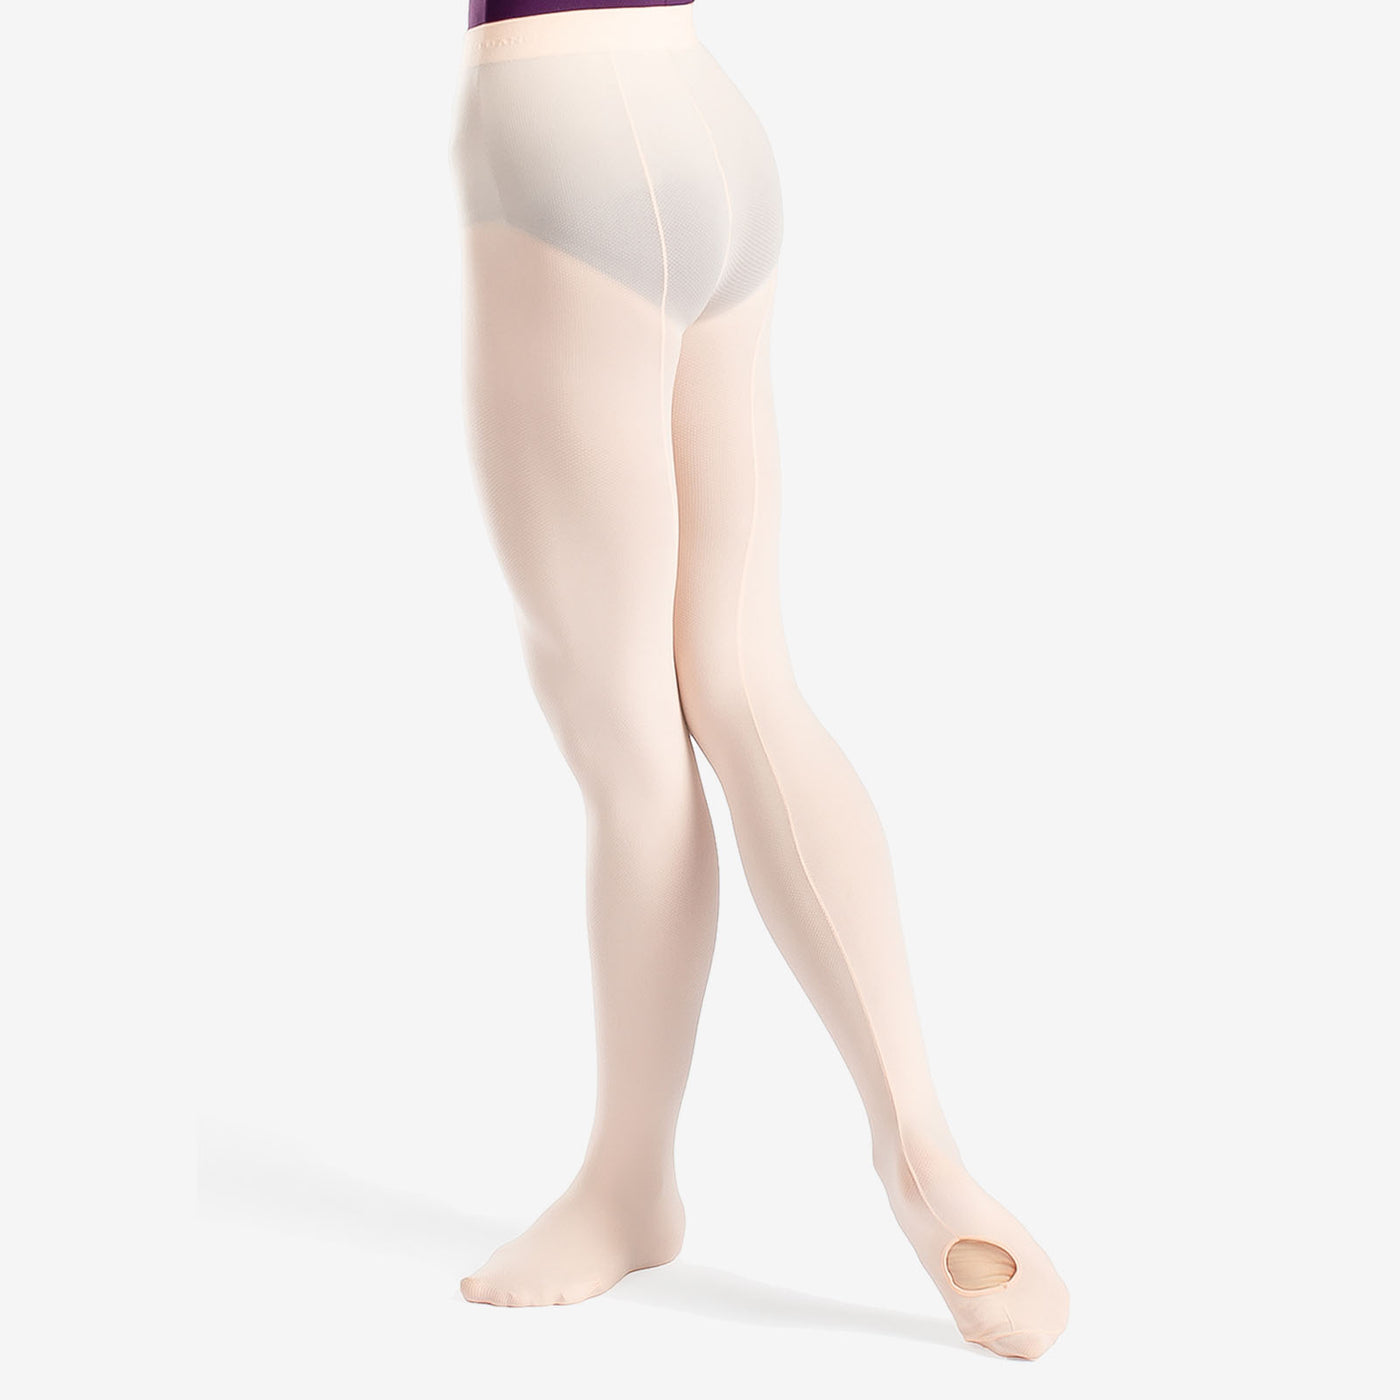 sofsy Sheer Back Seam Tights for Women Invisibly Reinforced Footed